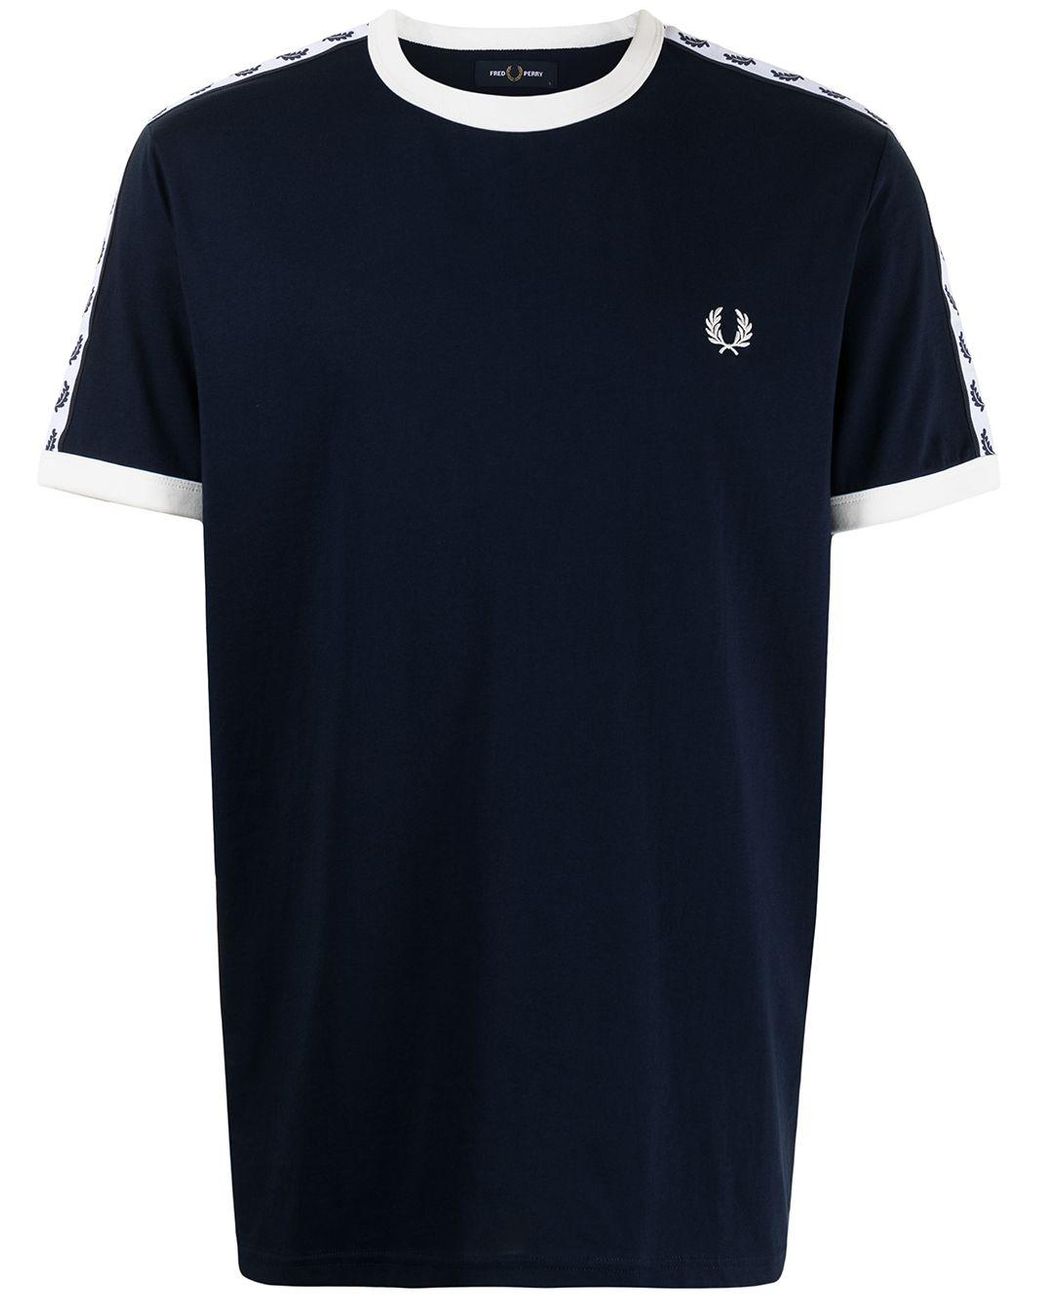 Fred Perry Cotton Taped Ringer T-shirt in Blue for Men - Lyst